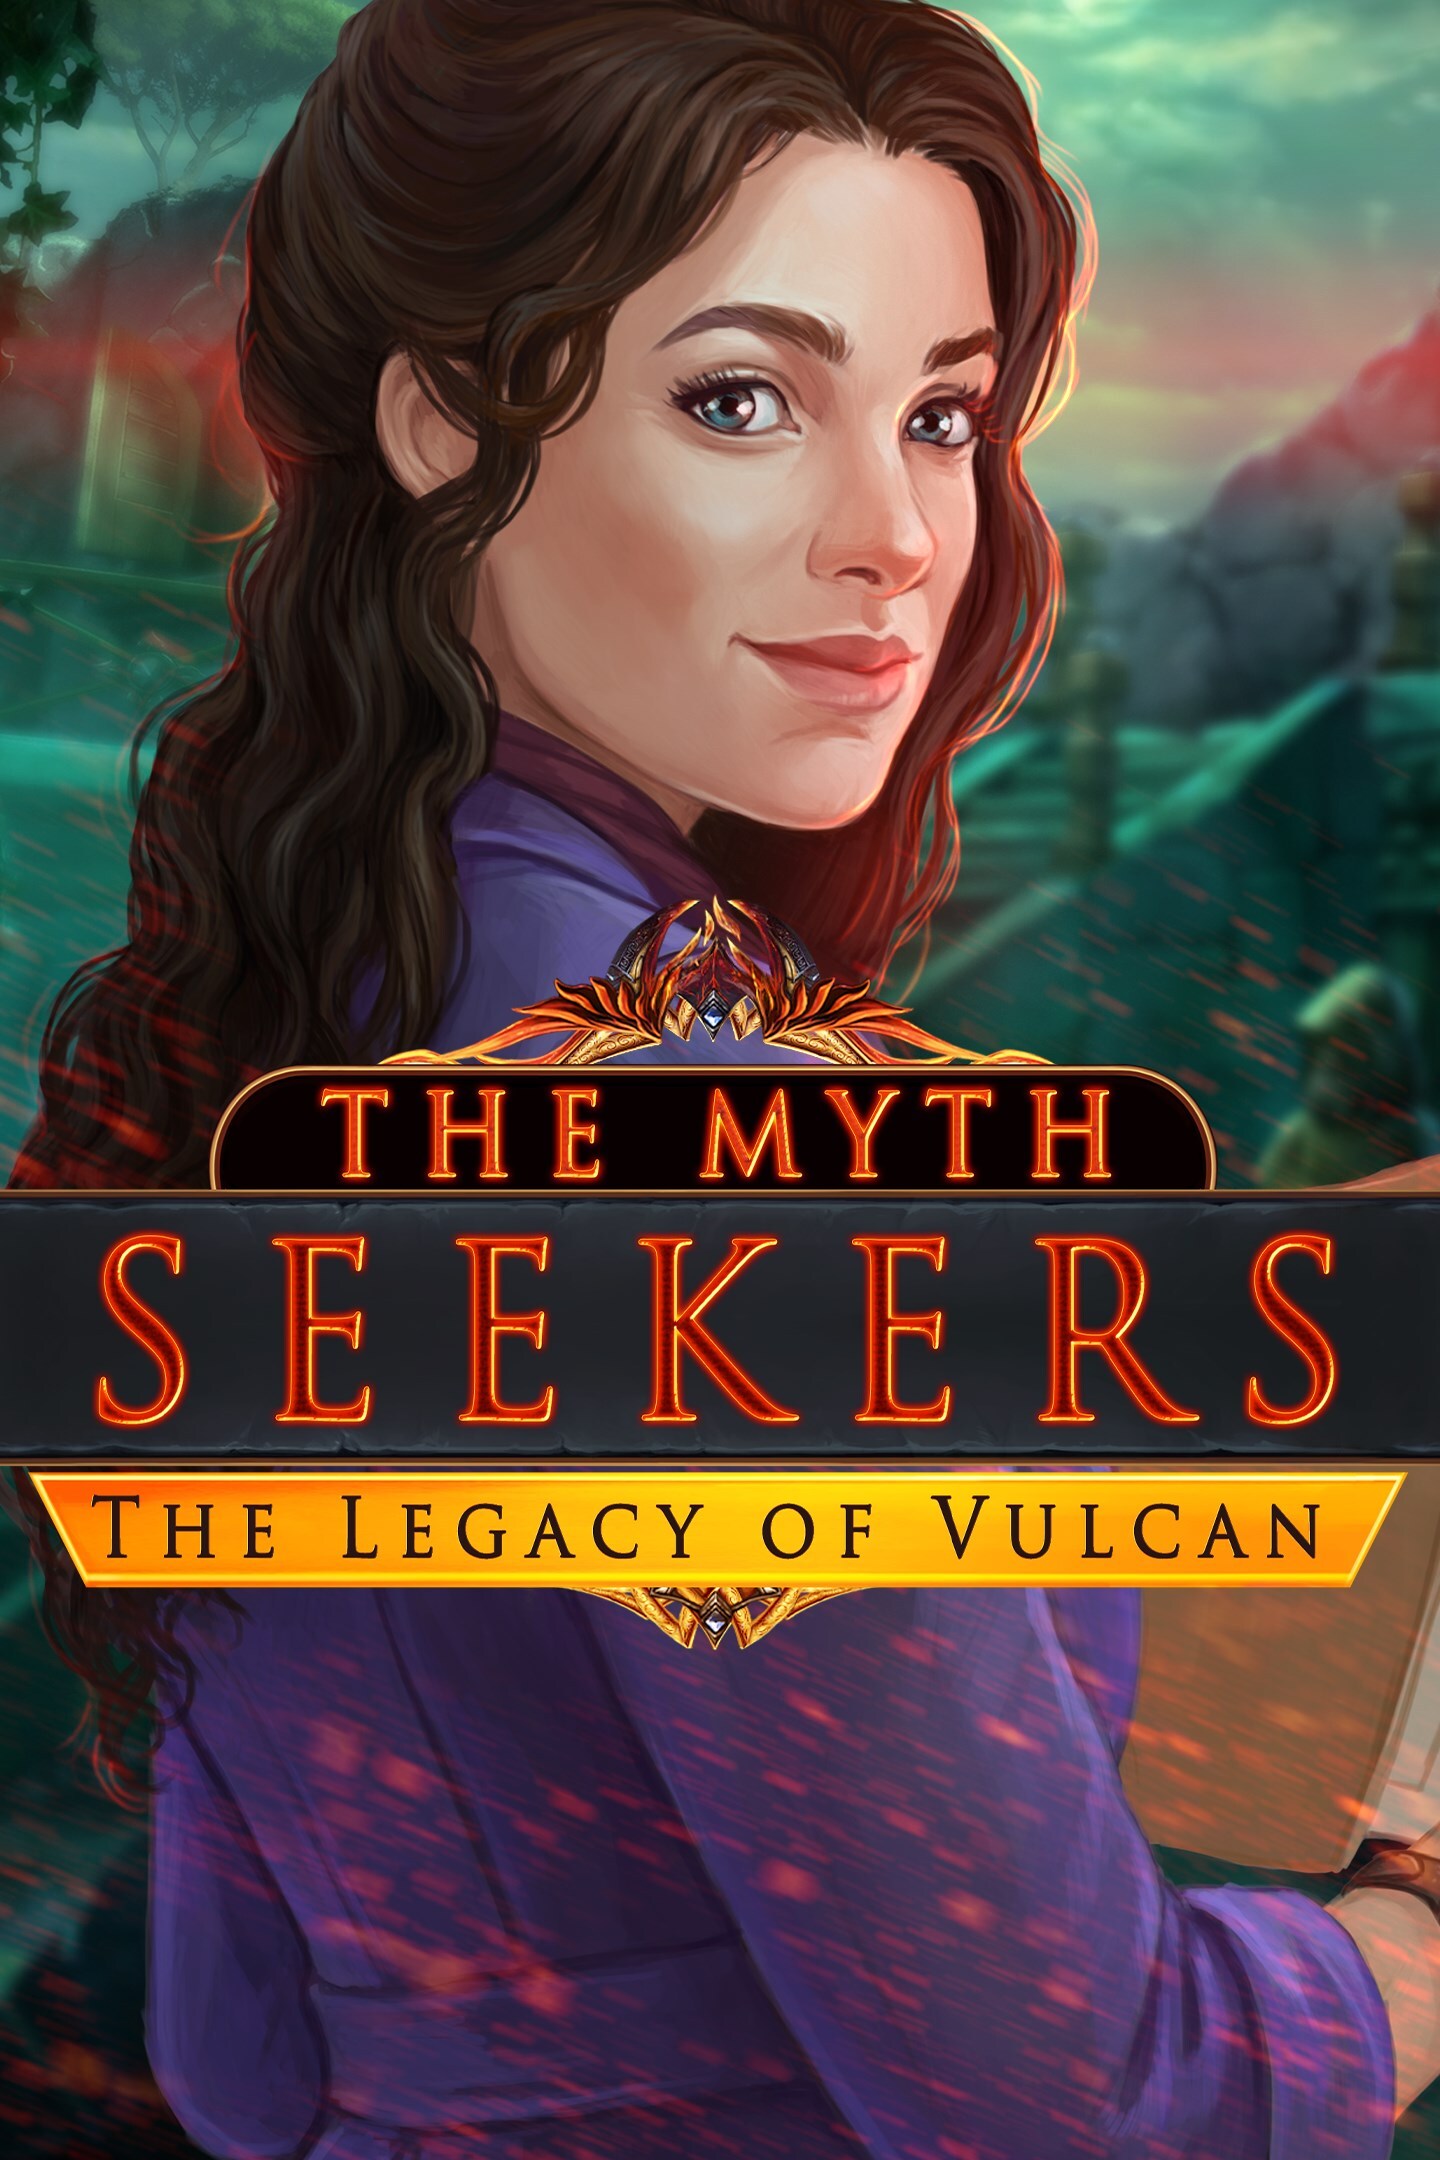 The Myth Seekers: The Legacy of Vulcan